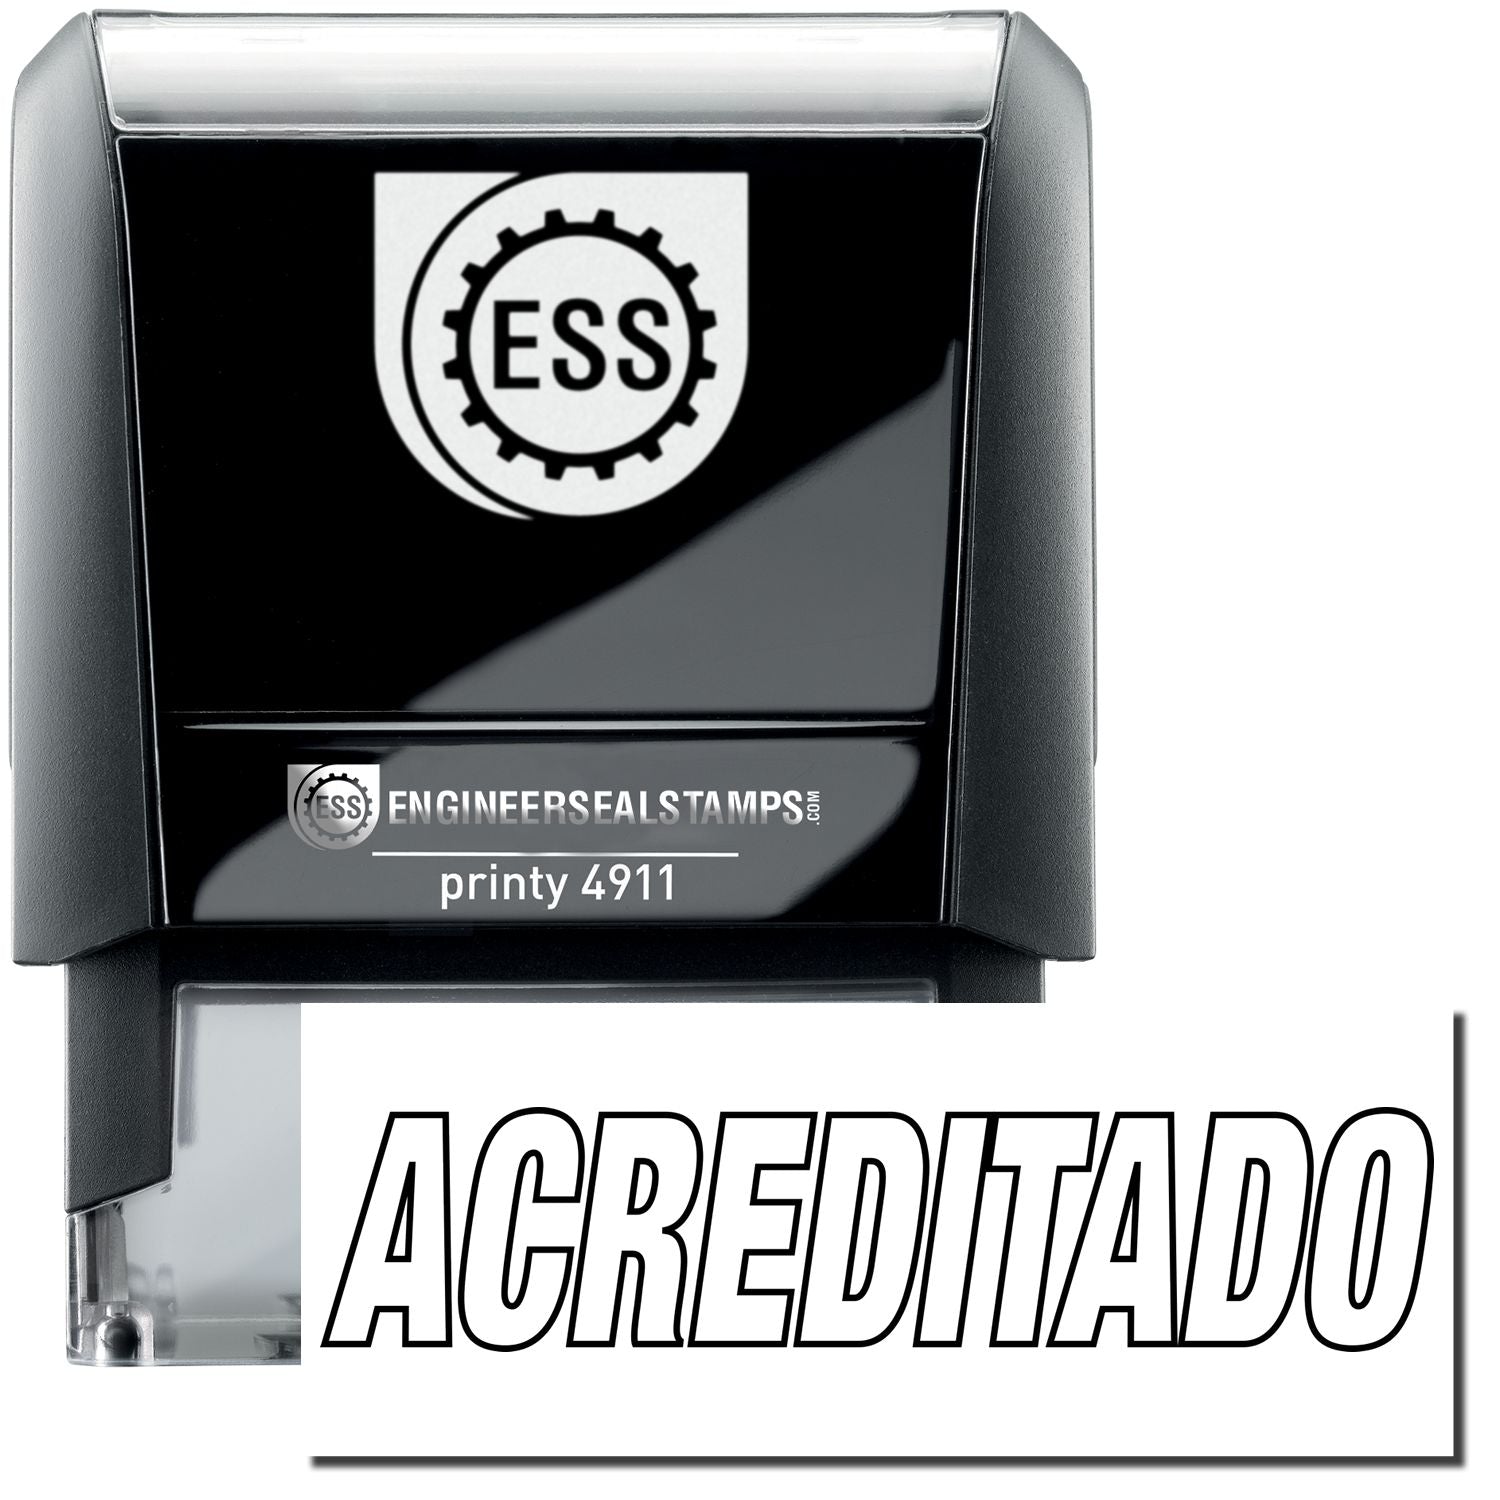 A self-inking stamp with a stamped image showing how the text "ACREDITADO" in an outline style is displayed after stamping.